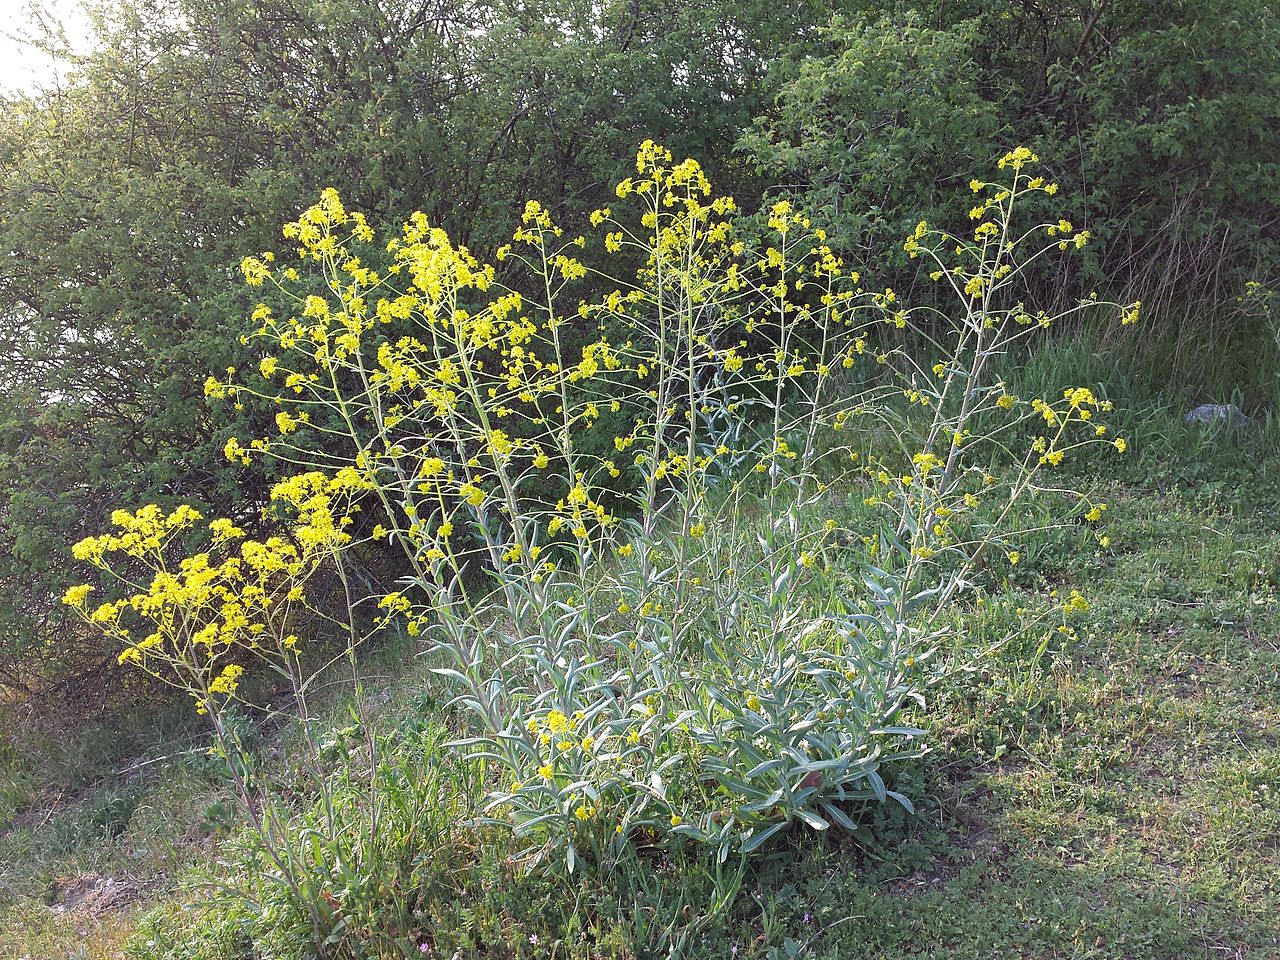 Dyer's woad